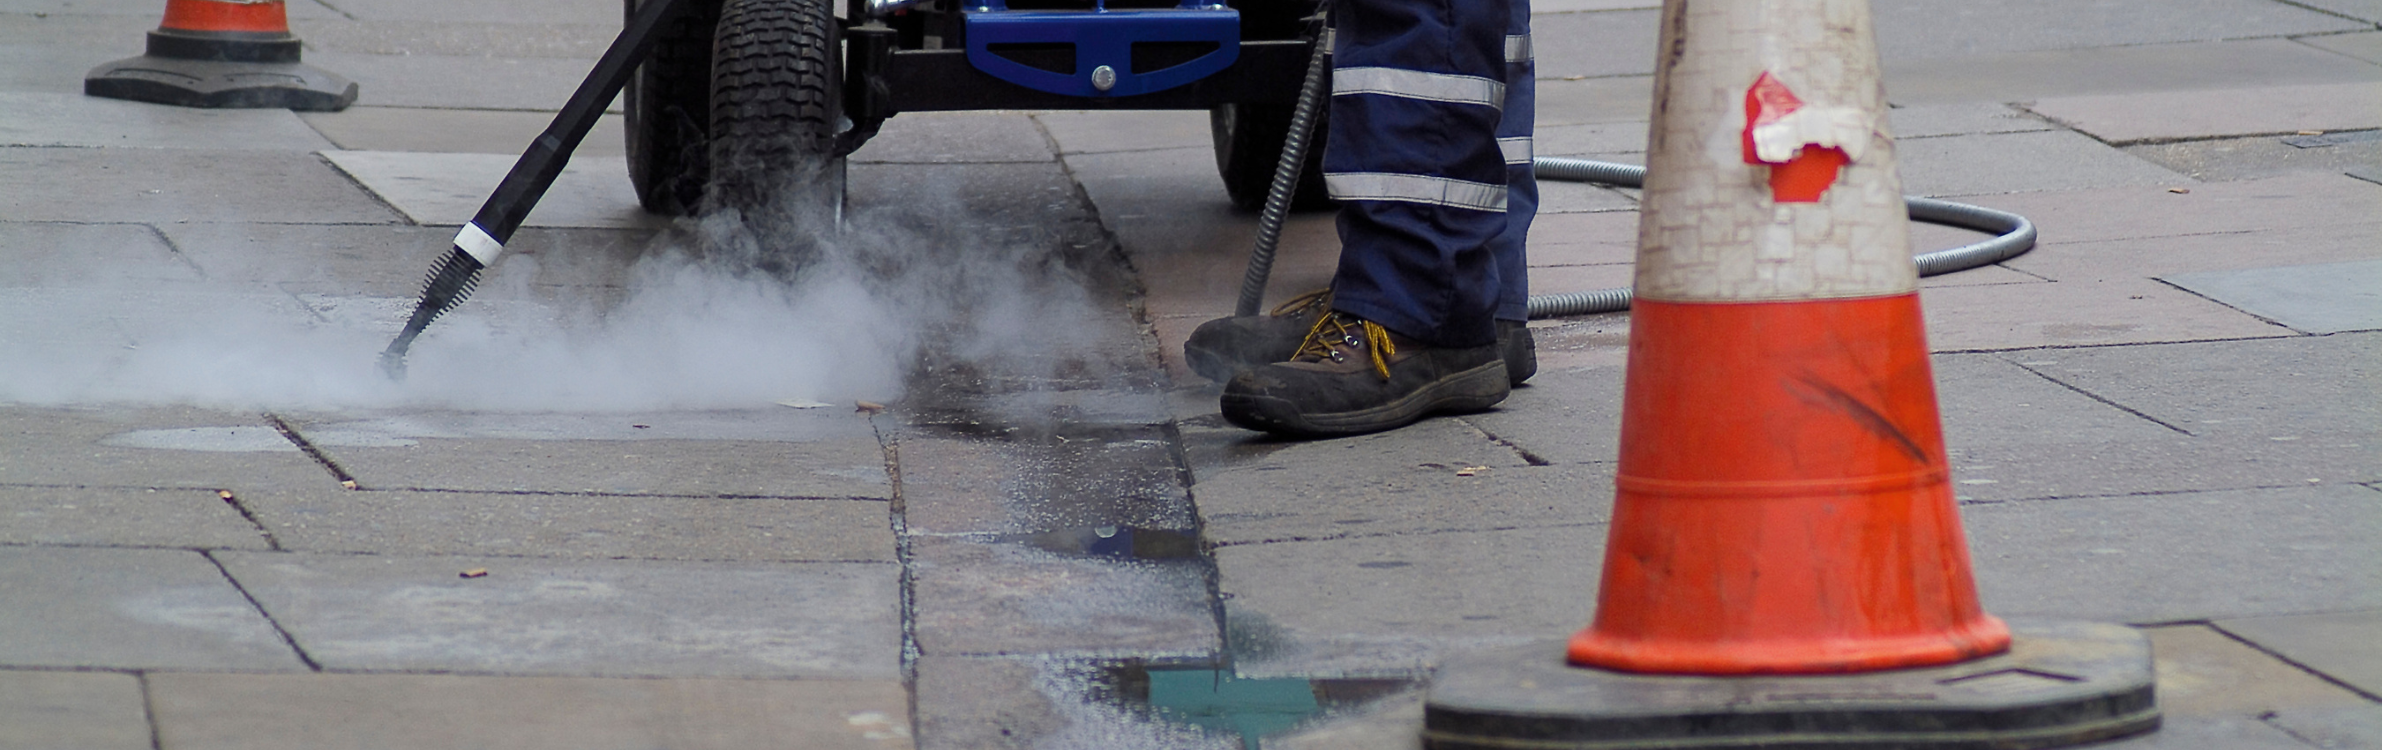 A street cleaner works to clean up chewing gum litter